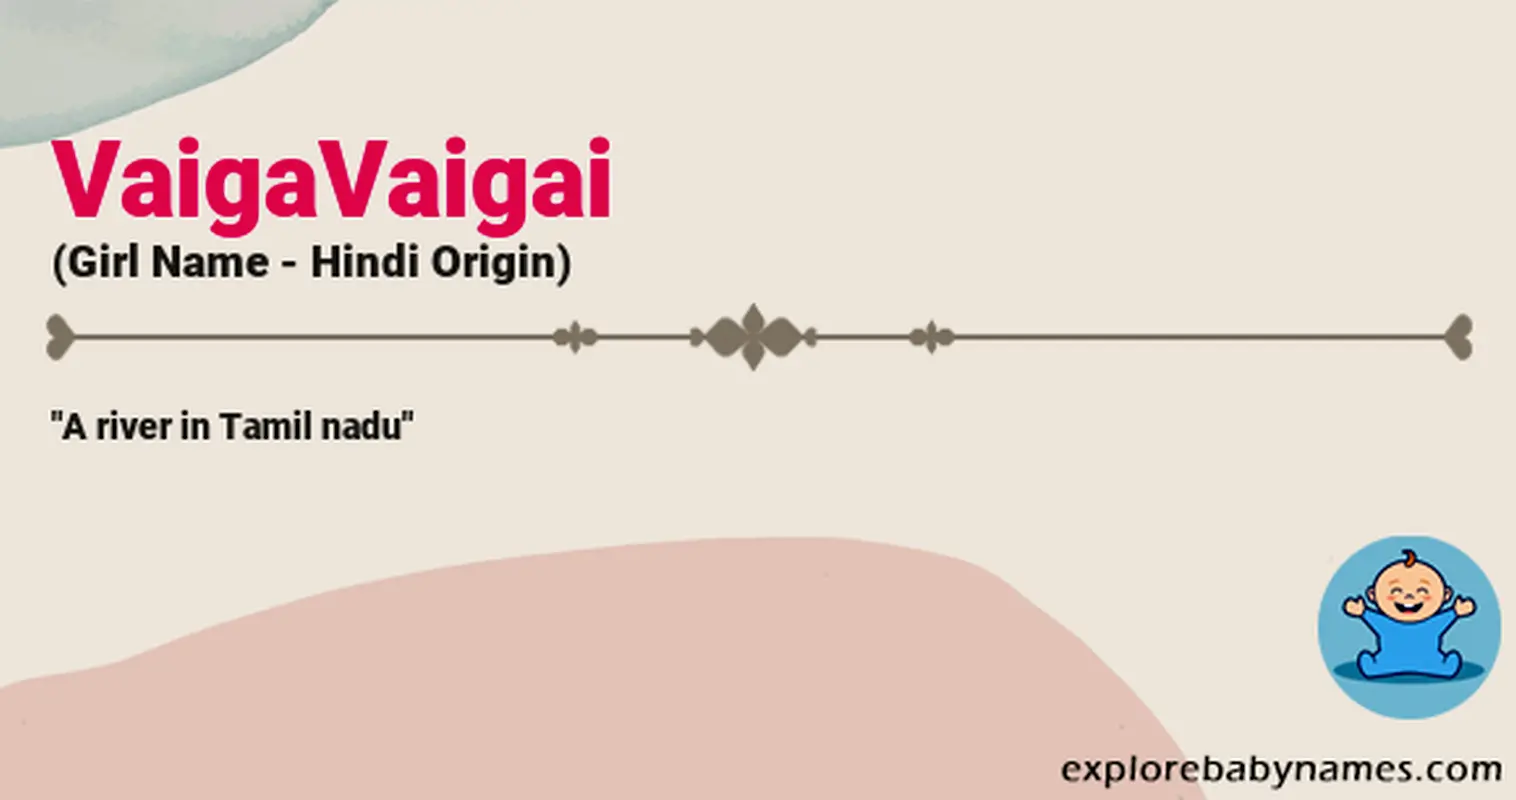 Meaning of VaigaVaigai